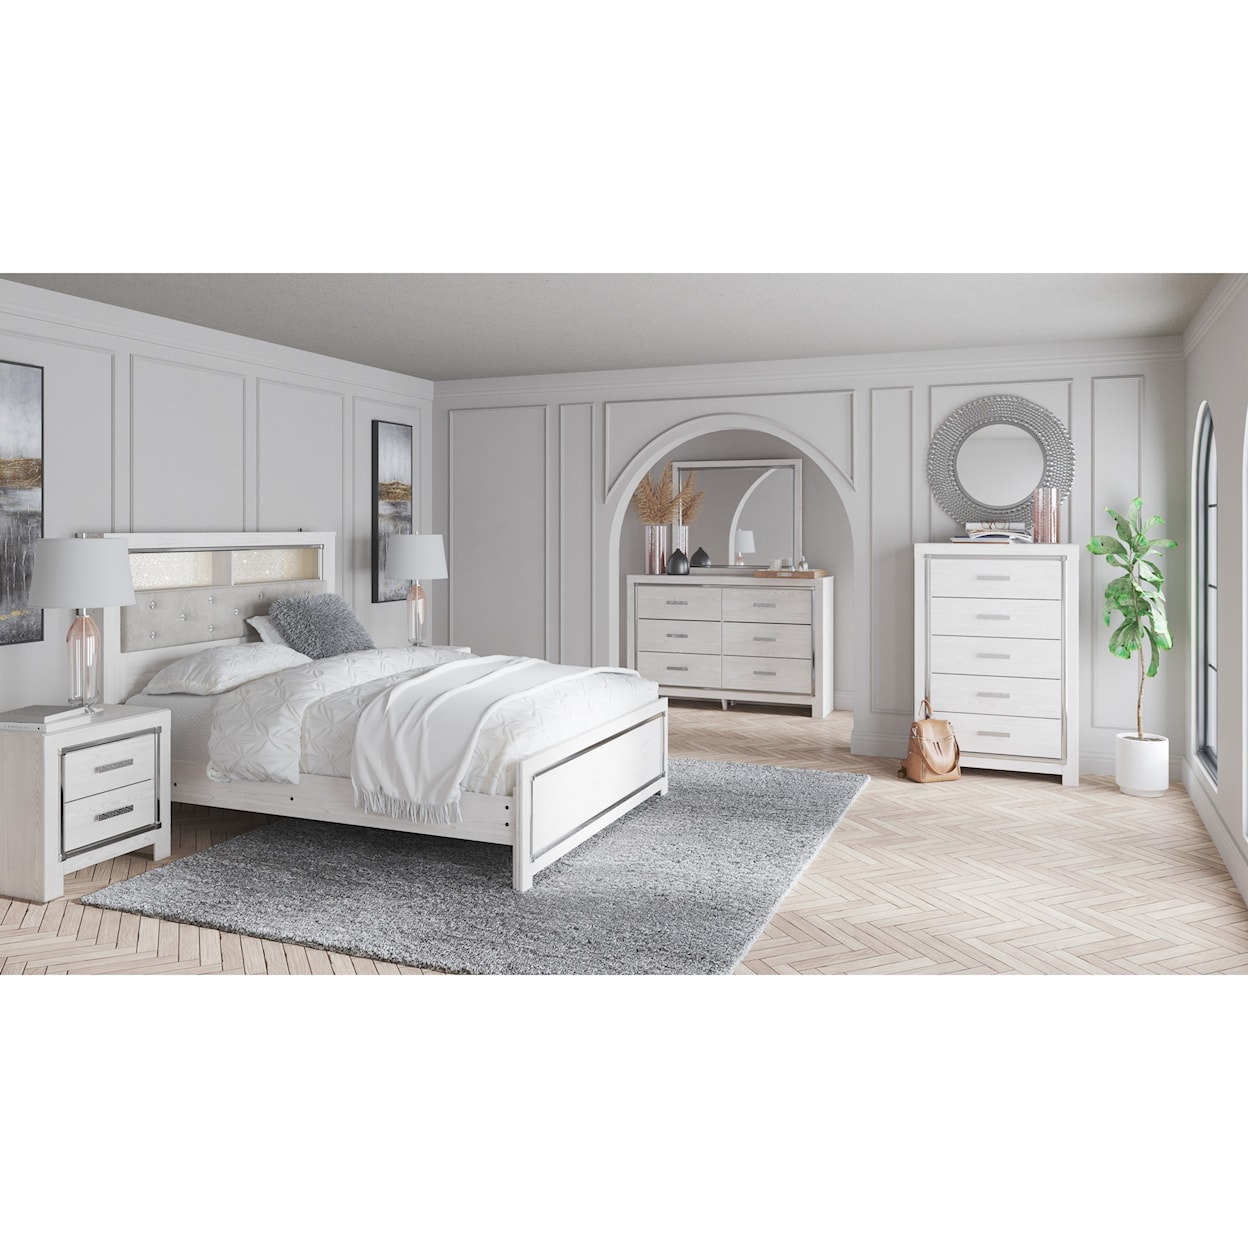 Signature Design by Ashley Altyra Full Bedroom Group